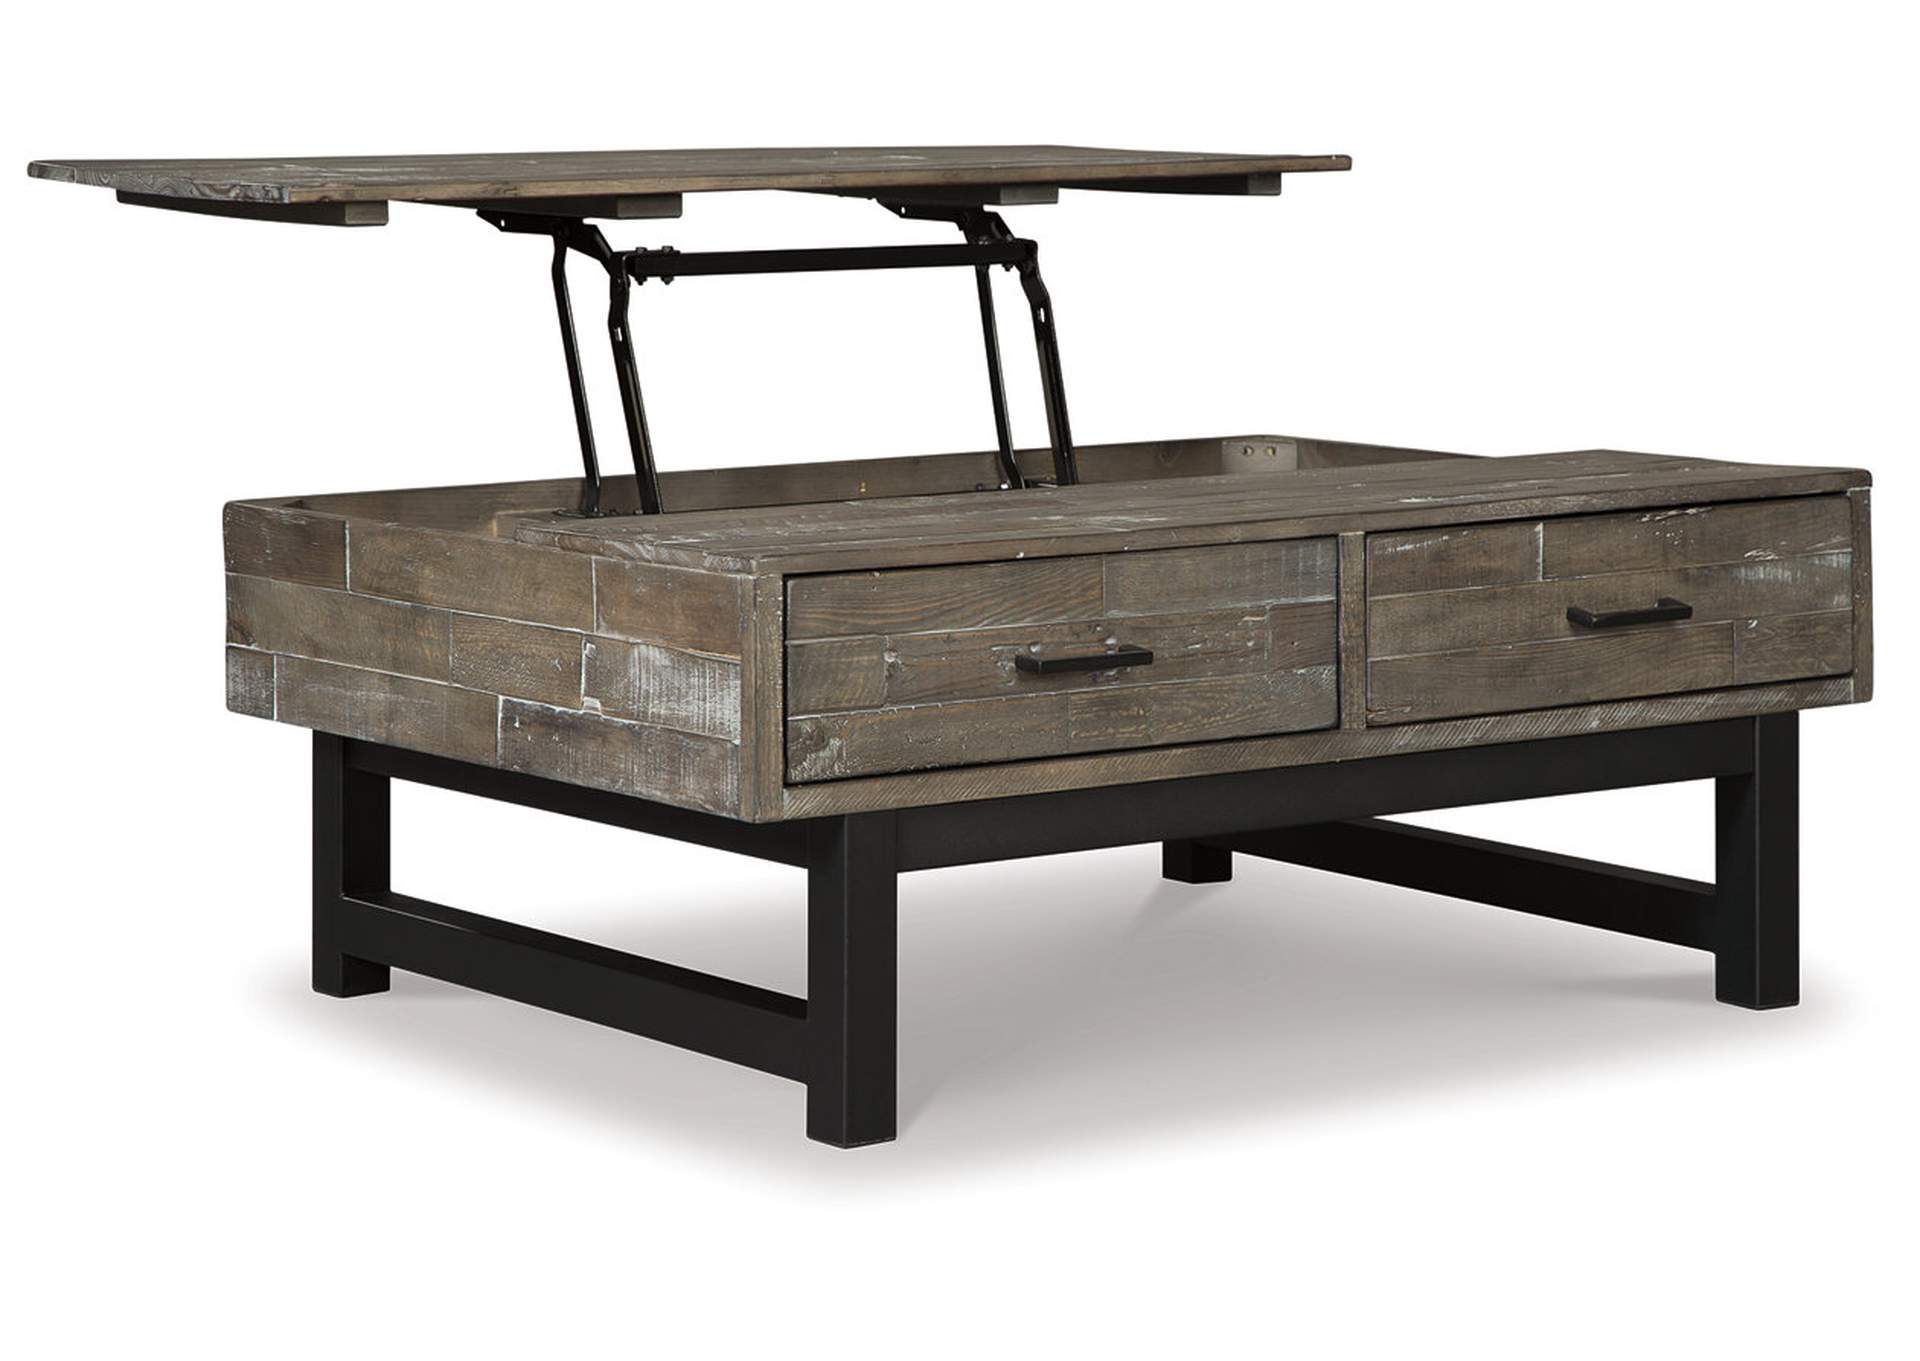 Mondoro Coffee Table with Lift Top,Signature Design By Ashley